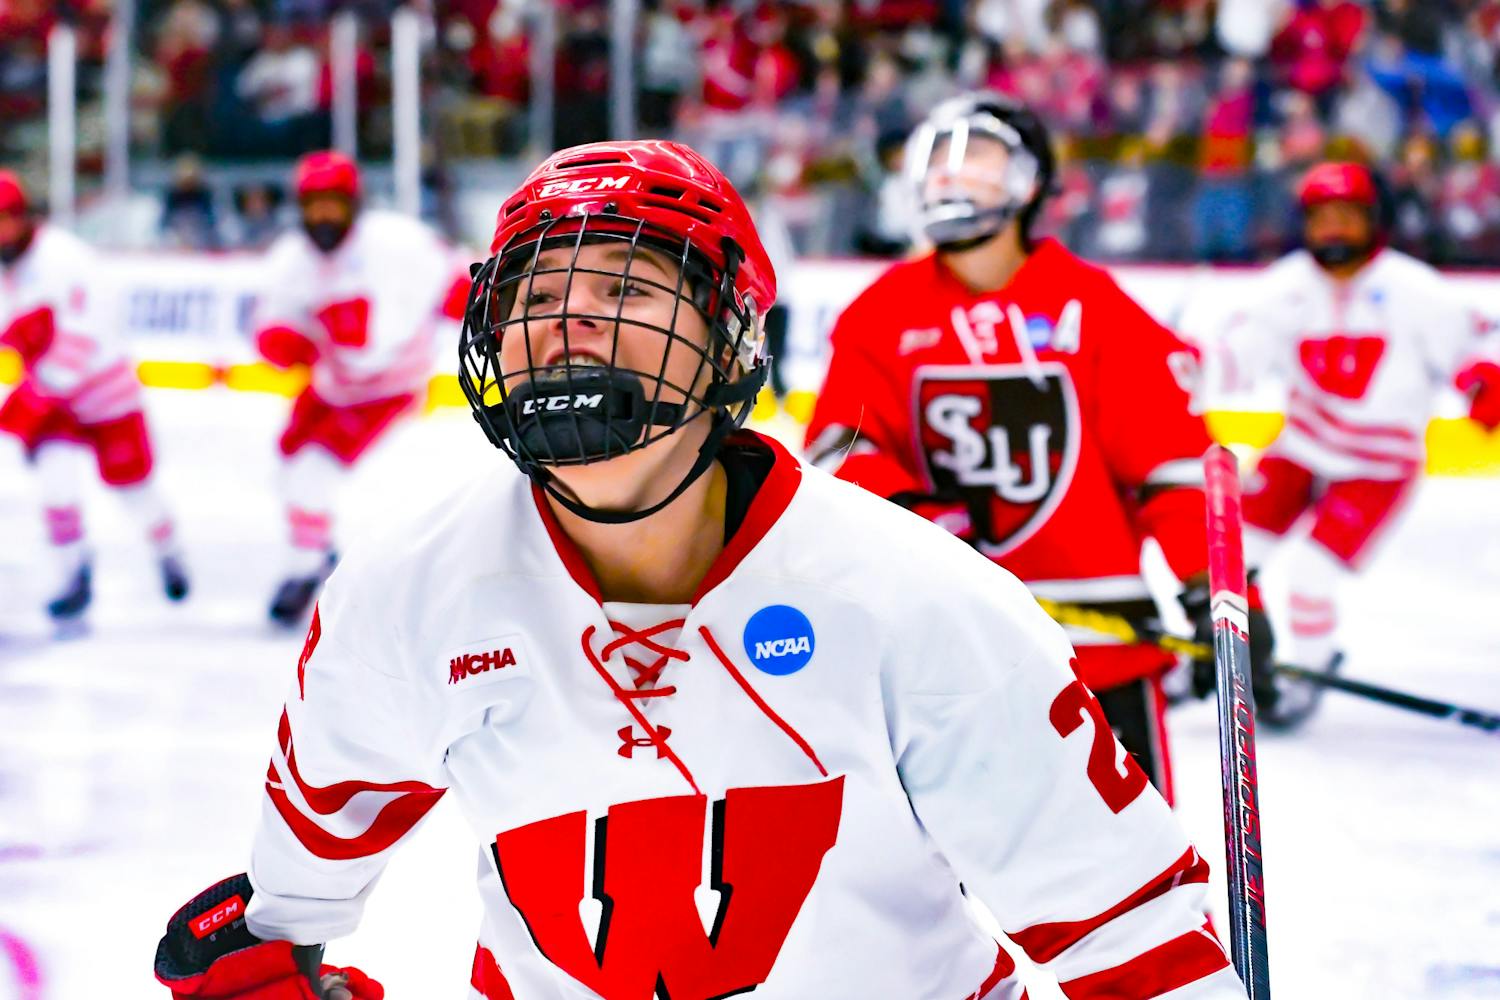 PHOTOS: Wisconsin Women's Hockey proceeds to the Frozen Four after dominating St Lawrence, 4-0